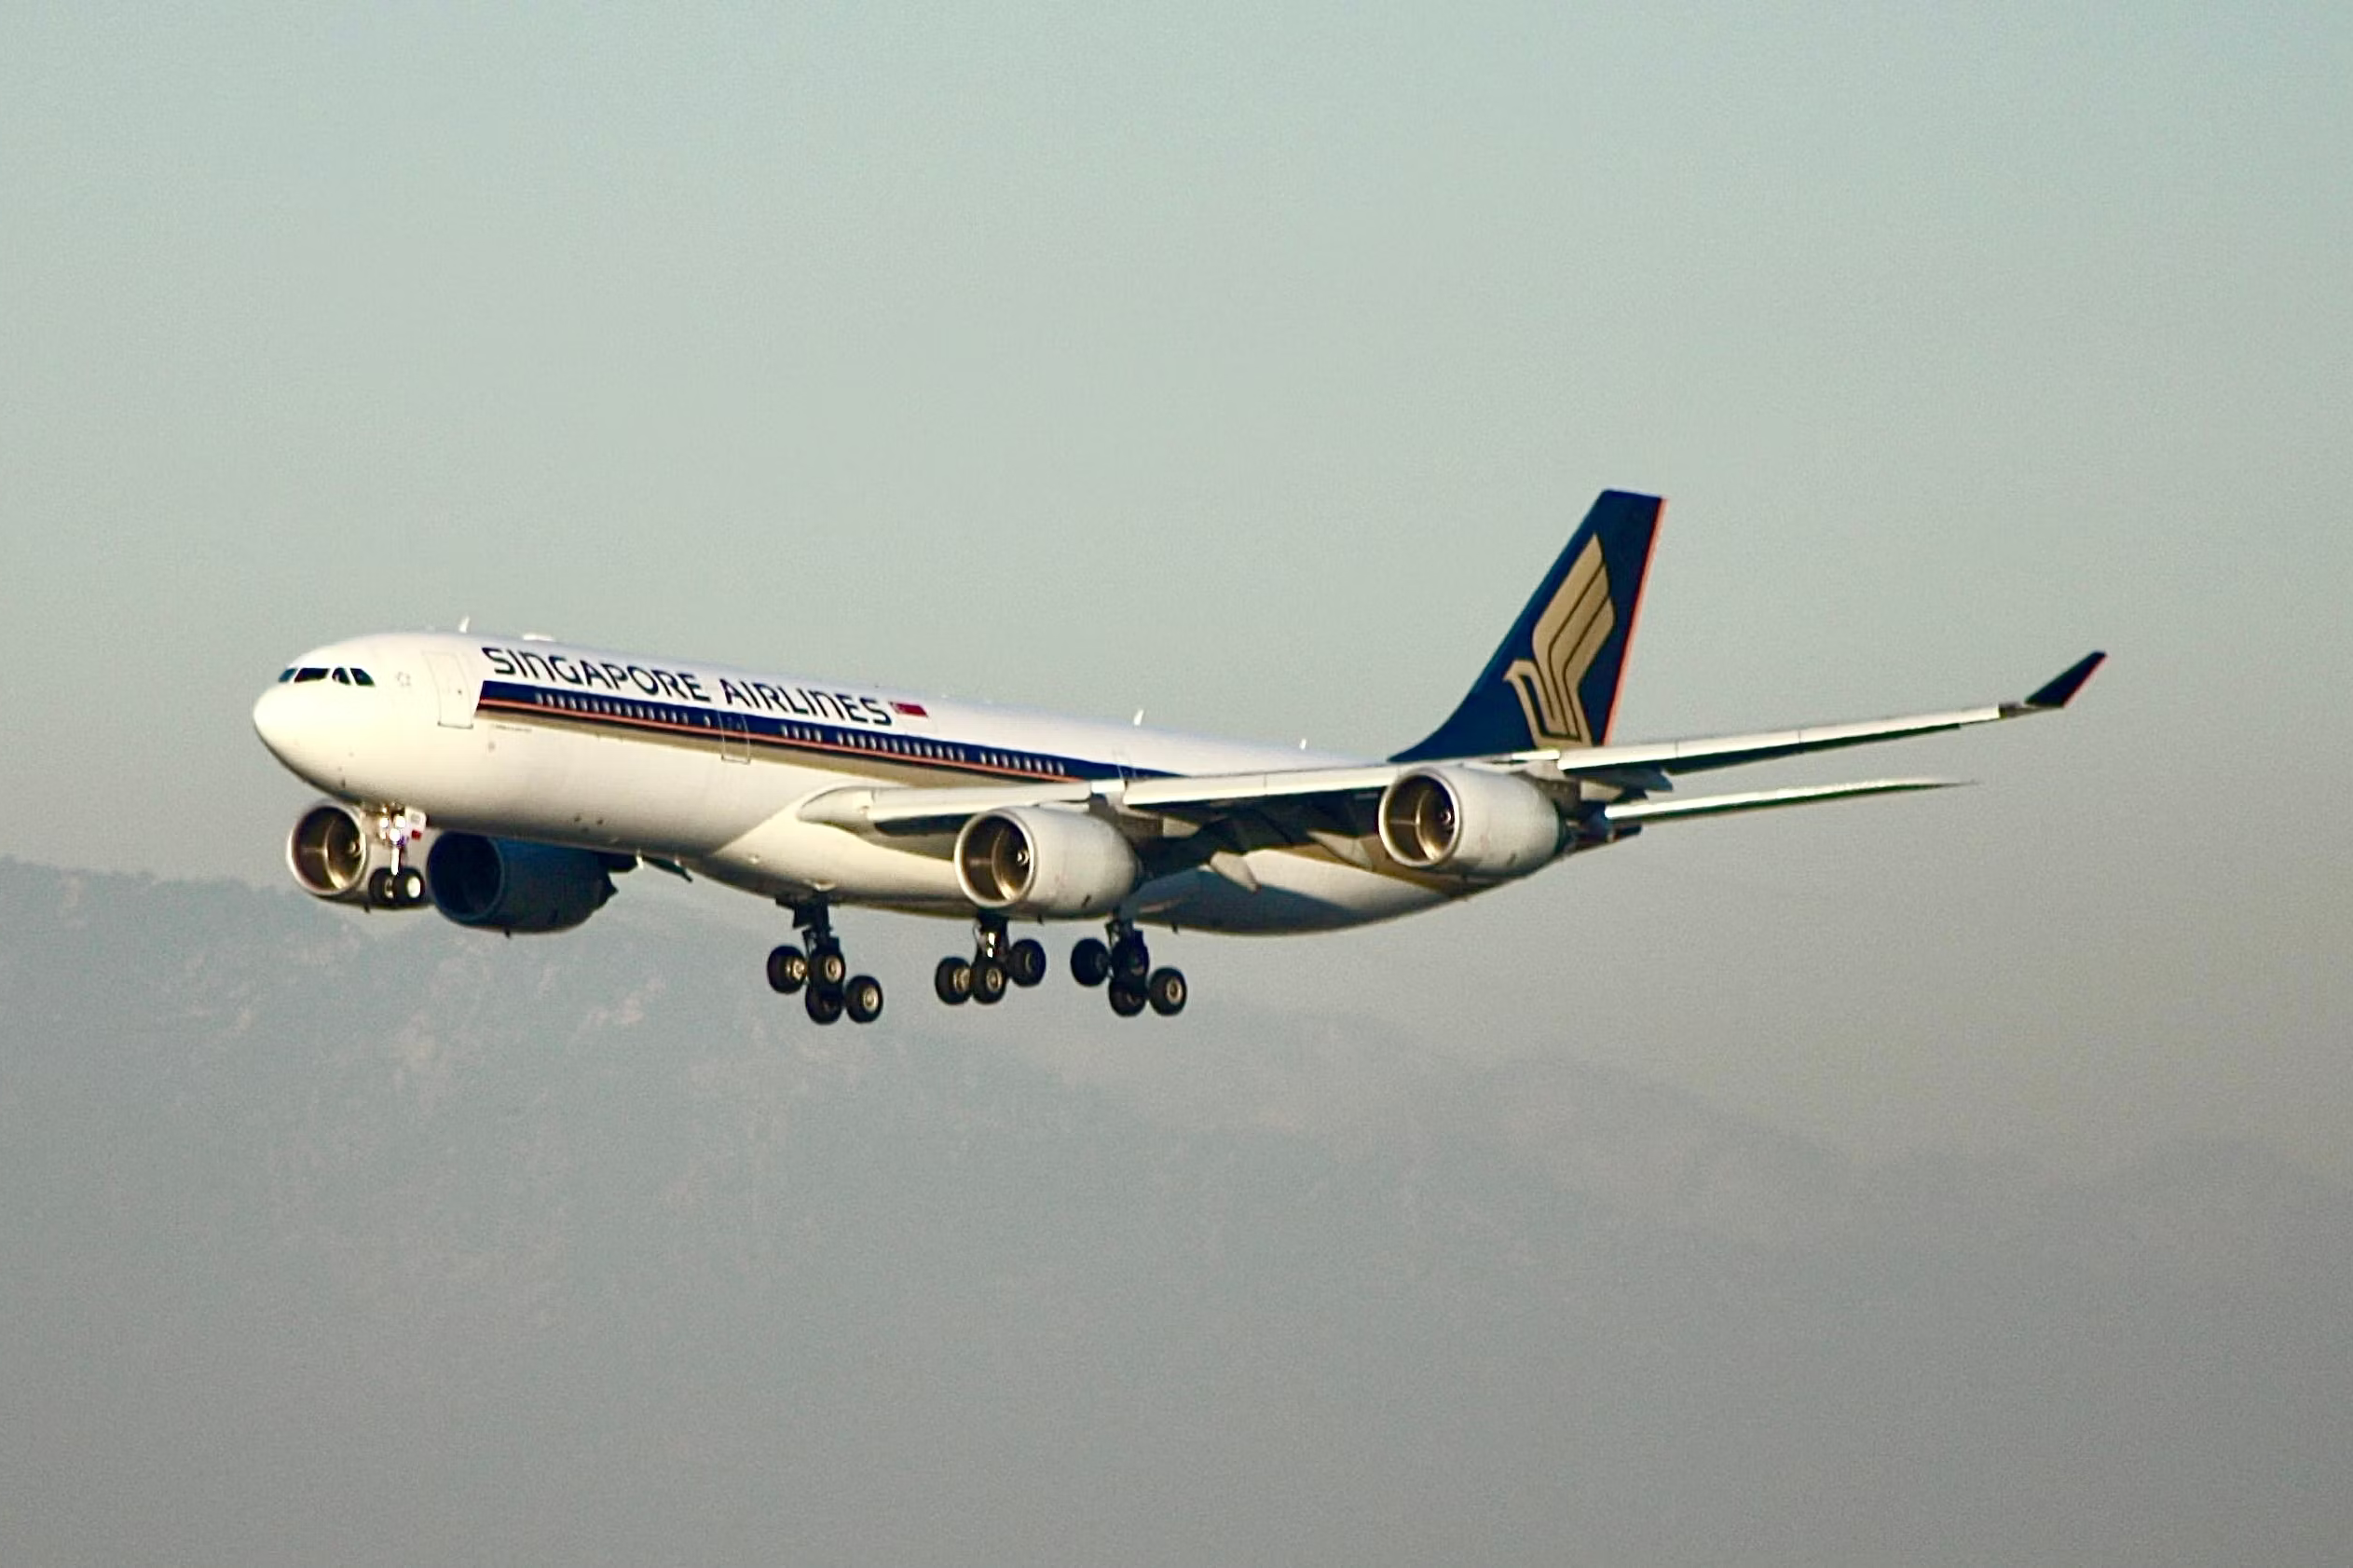 A Singapore Airlines A340-300 flying in the sky.